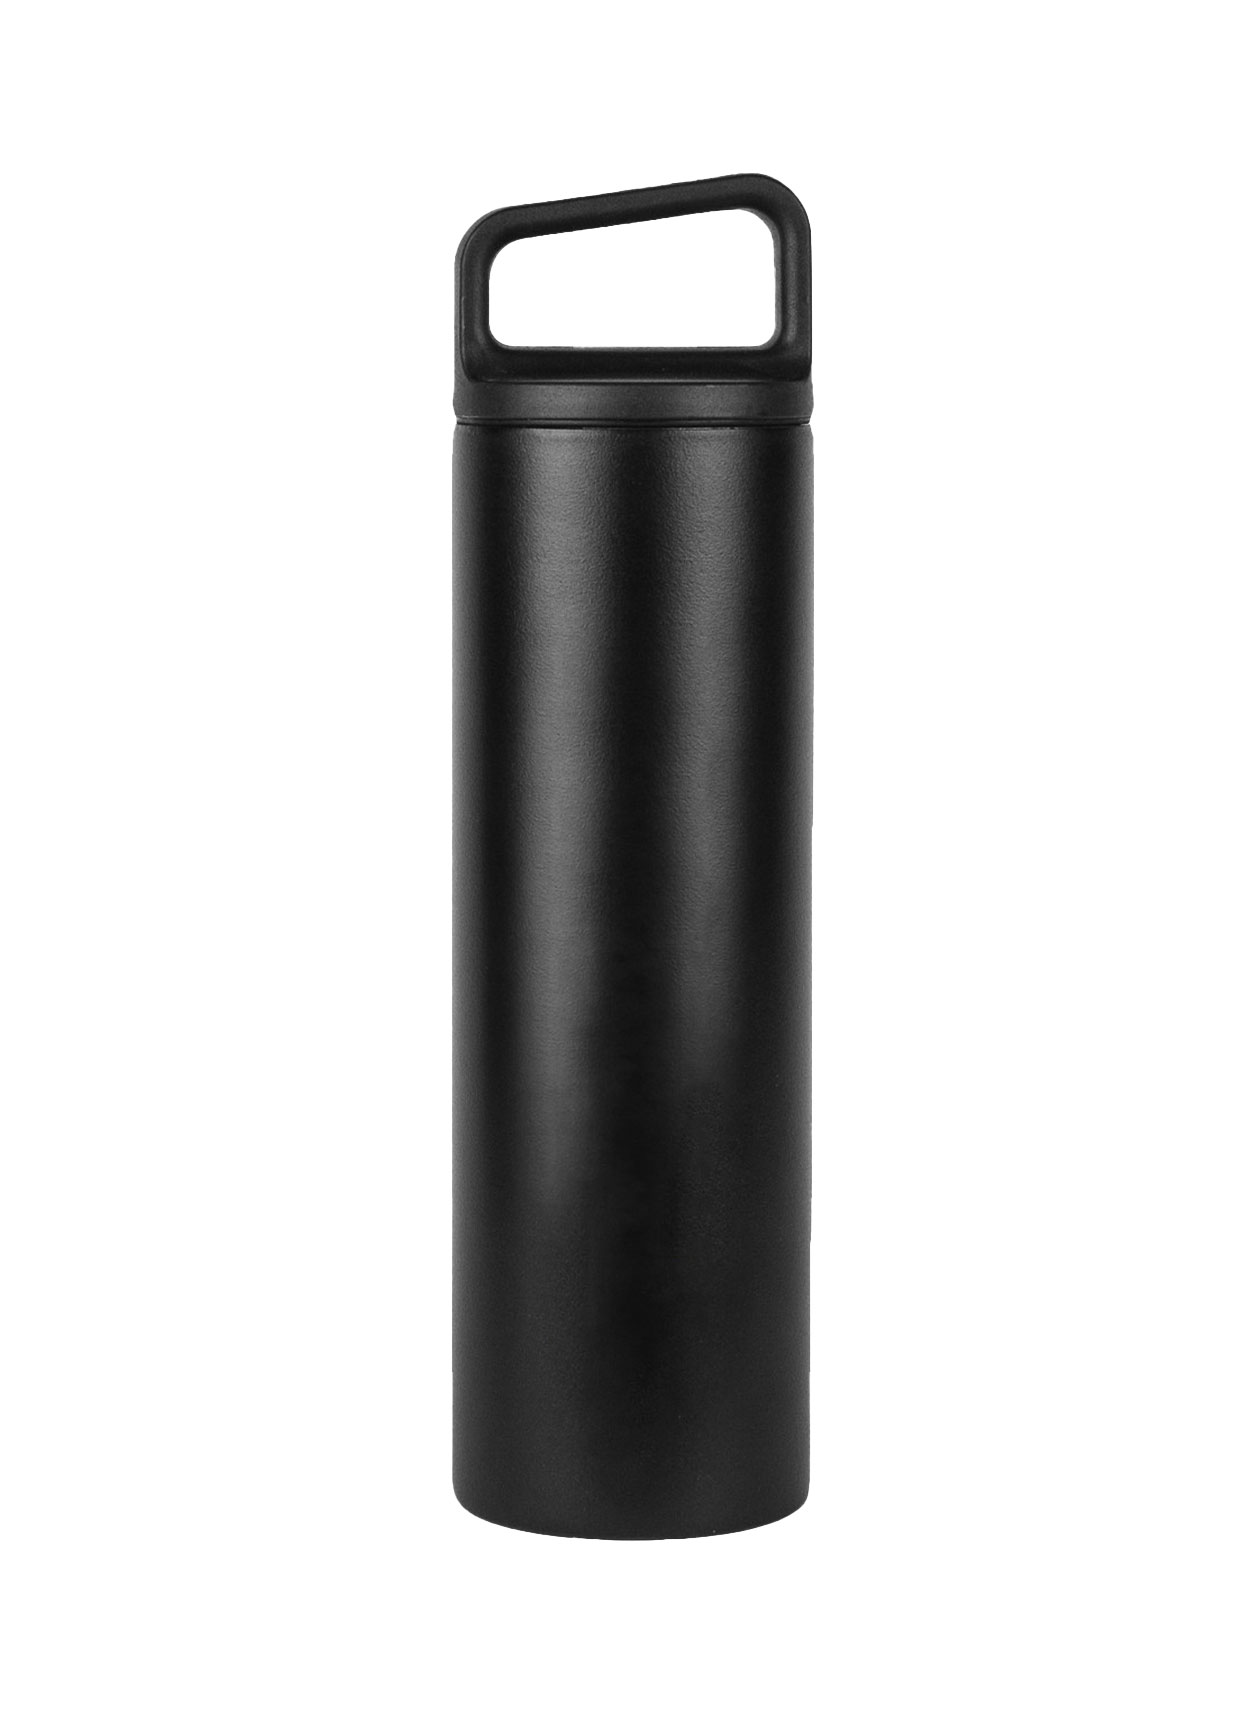 Miir Black Powder Vacuum Insulated Wide Mouth Bottle - 20 oz